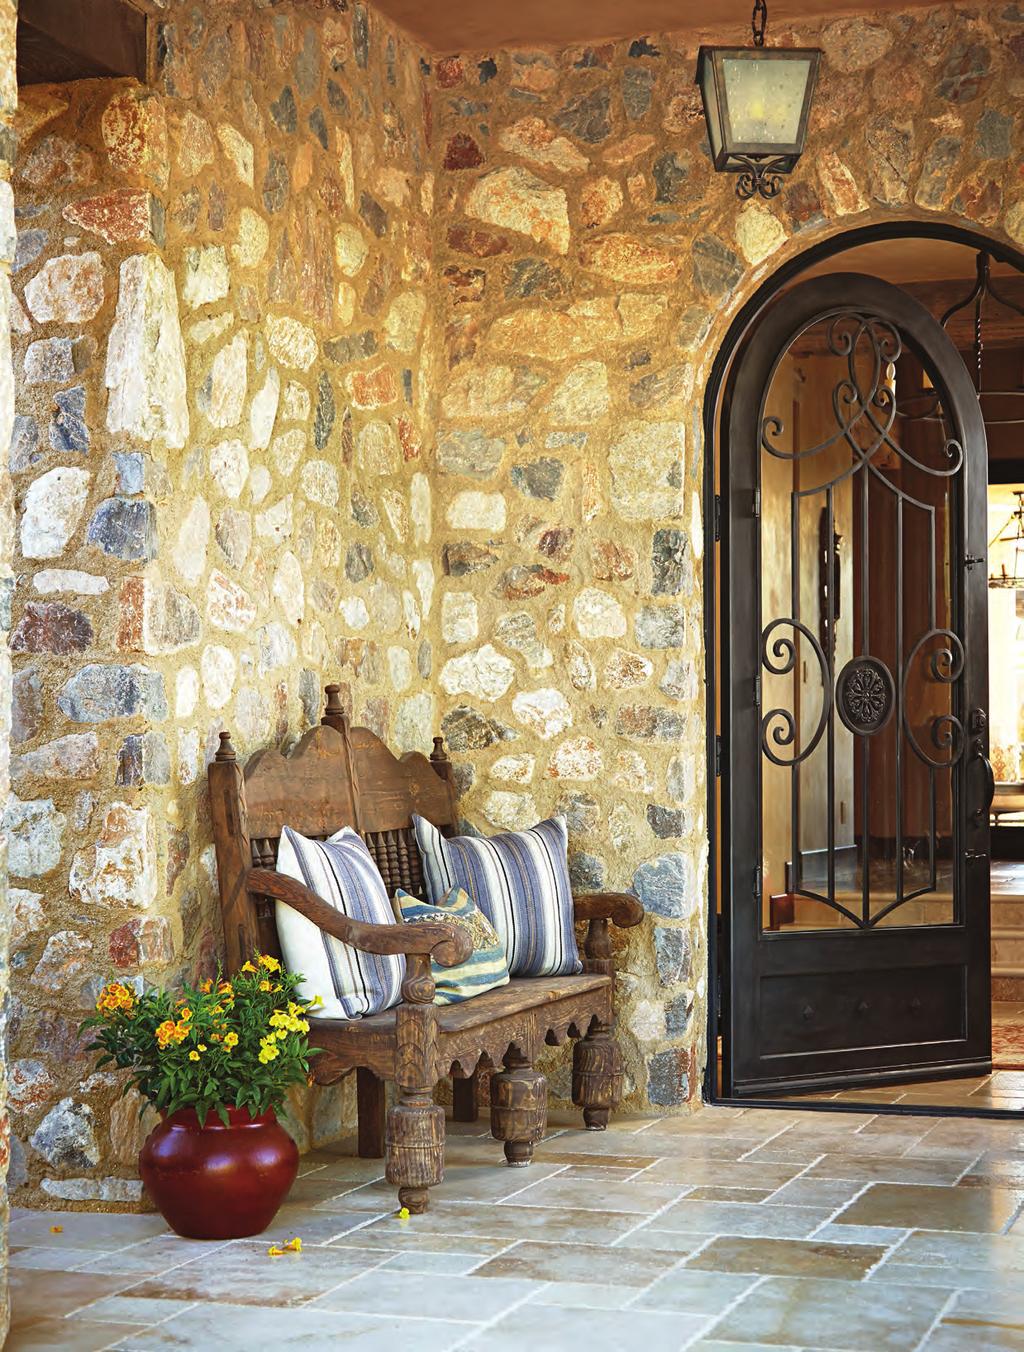 Native cobblestones applied to exterior walls and hand-forged ironwork on the door instantly age this new Arizona